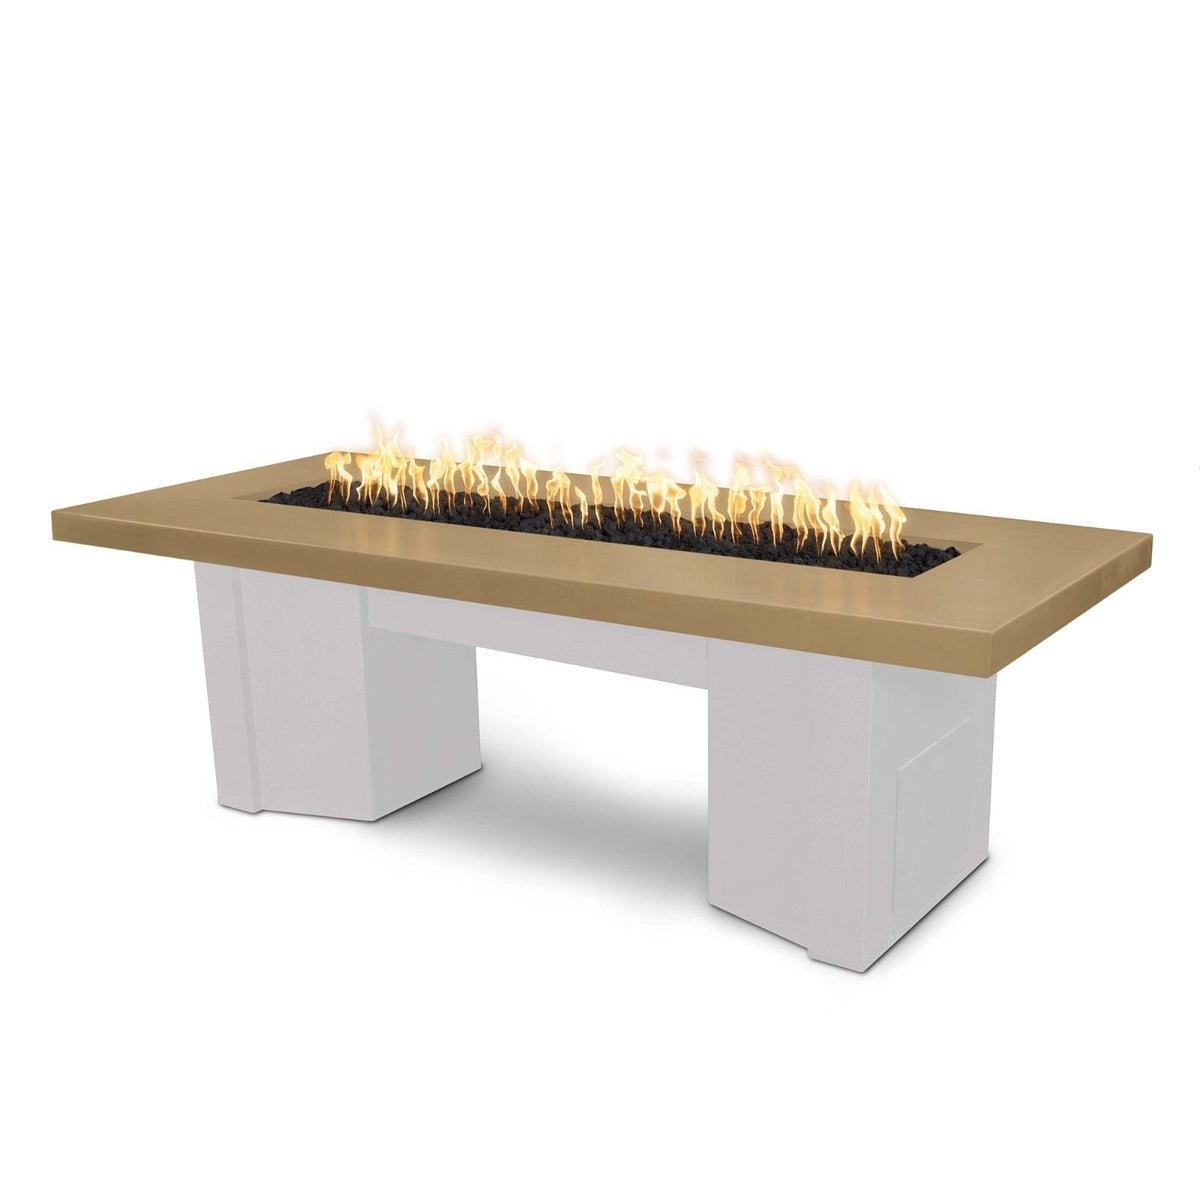 The Outdoor Plus Fire Features Brown (-BRN) / White Powder Coated Steel (-WHT) The Outdoor Plus 60&quot; Alameda Fire Table Smooth Concrete in Liquid Propane - Flame Sense System with Push Button Spark Igniter / OPT-ALMGFRC60FSEN-LP